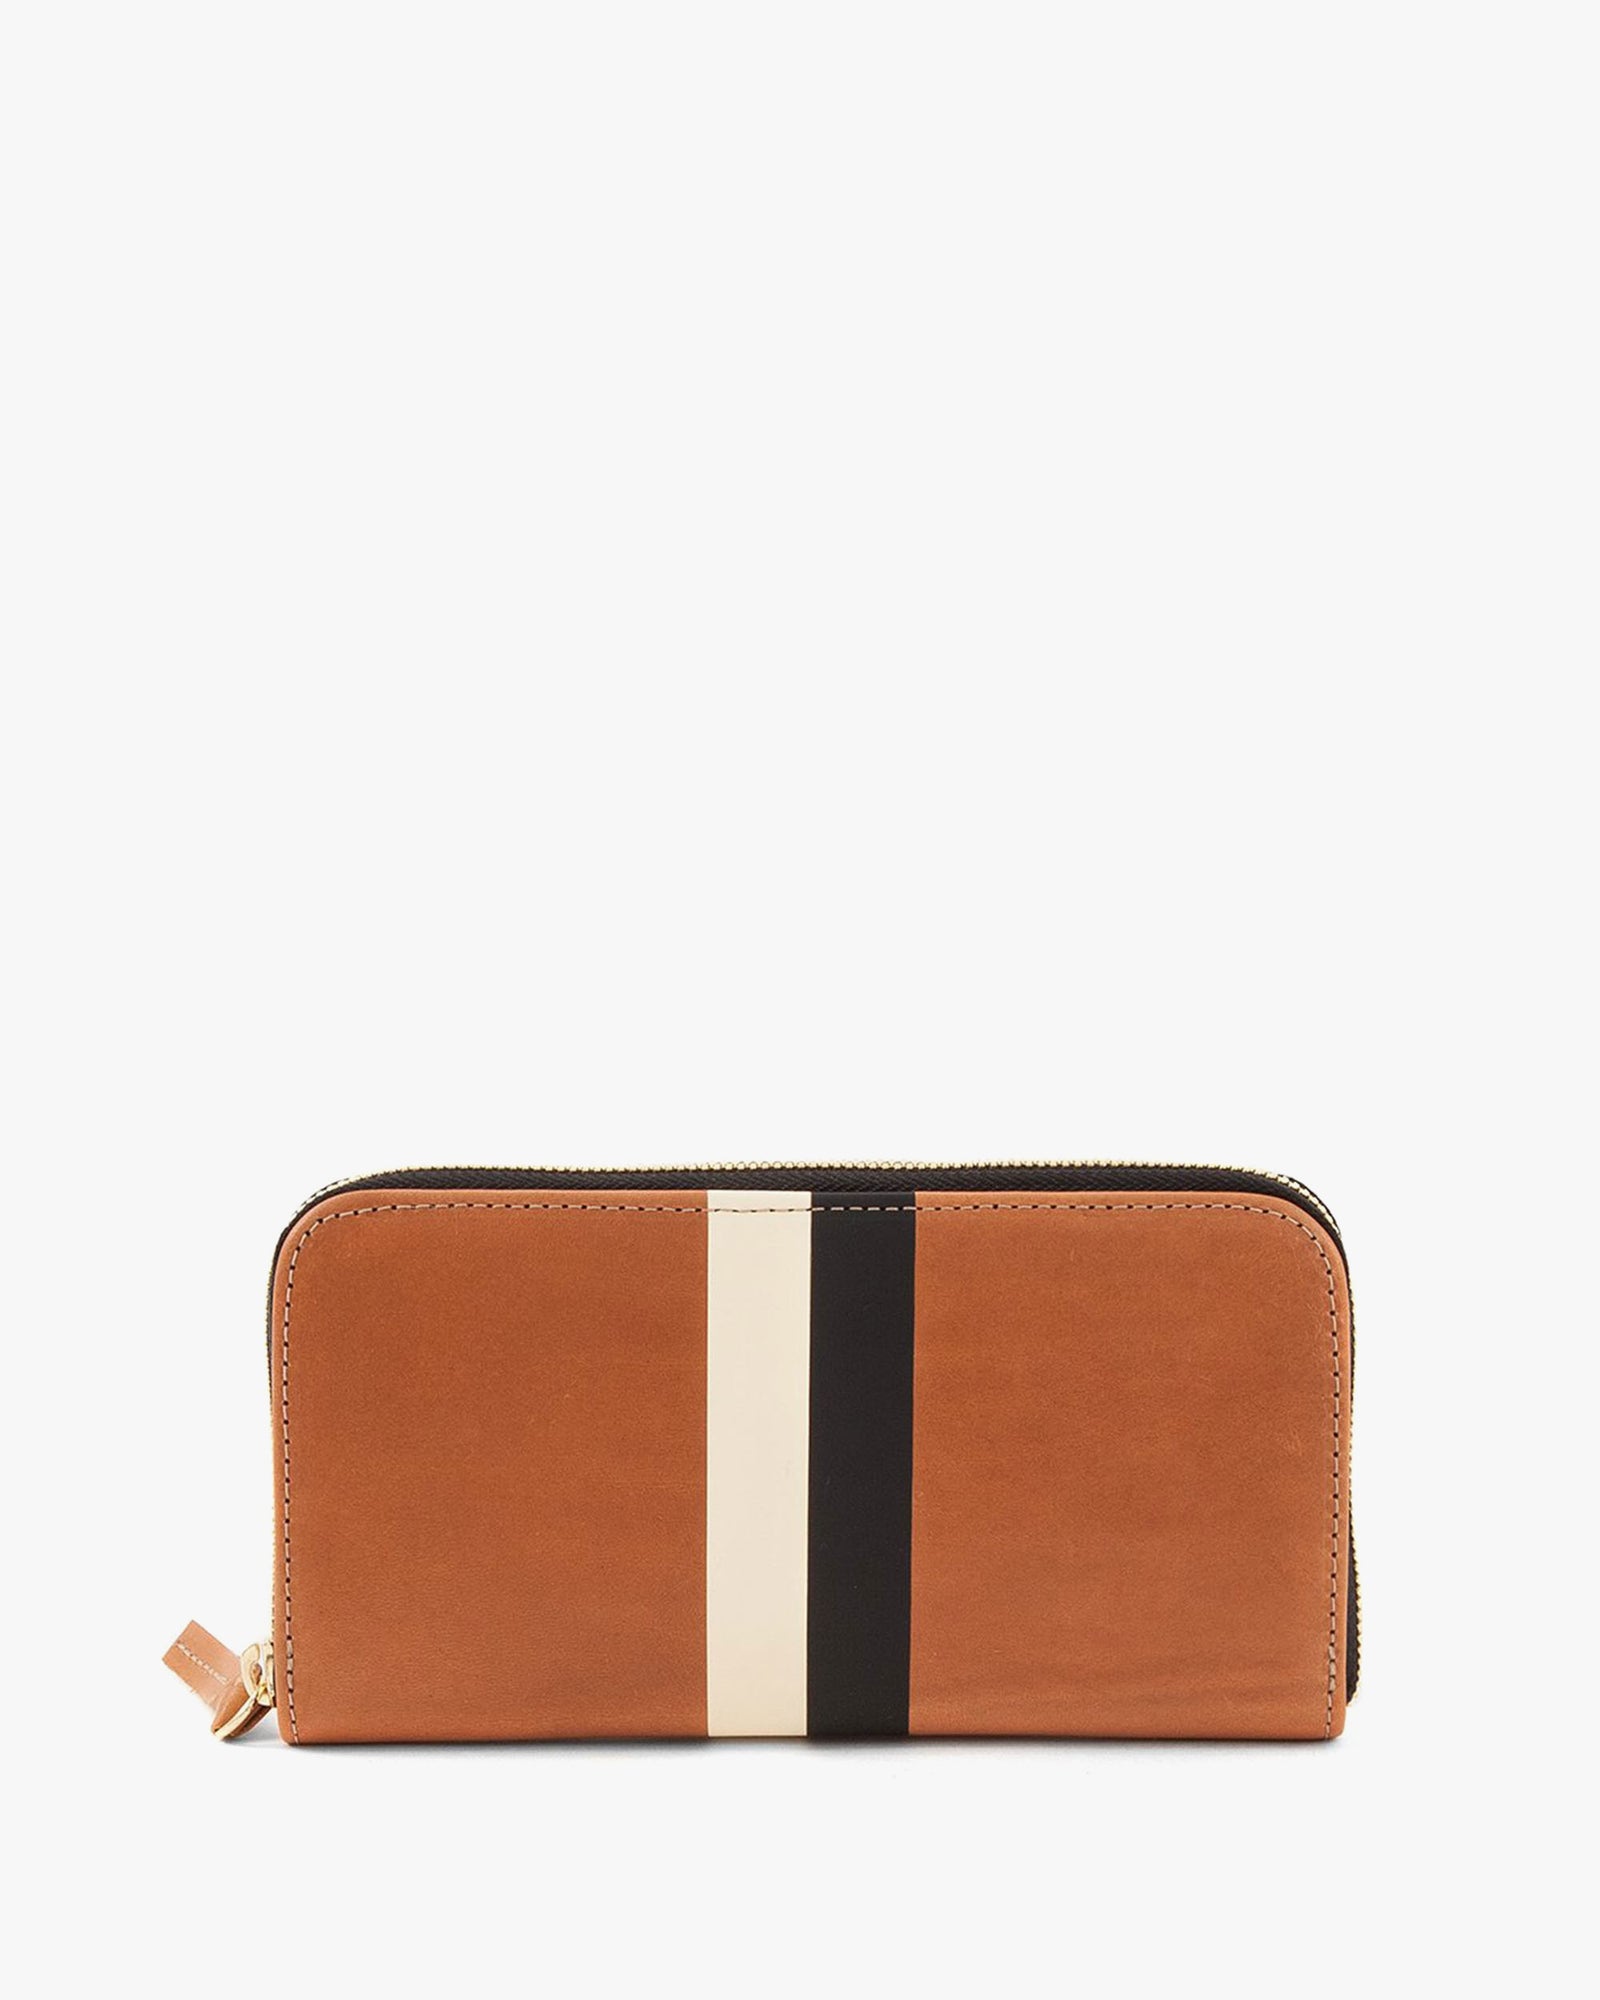 Clare V. Leather Wallet